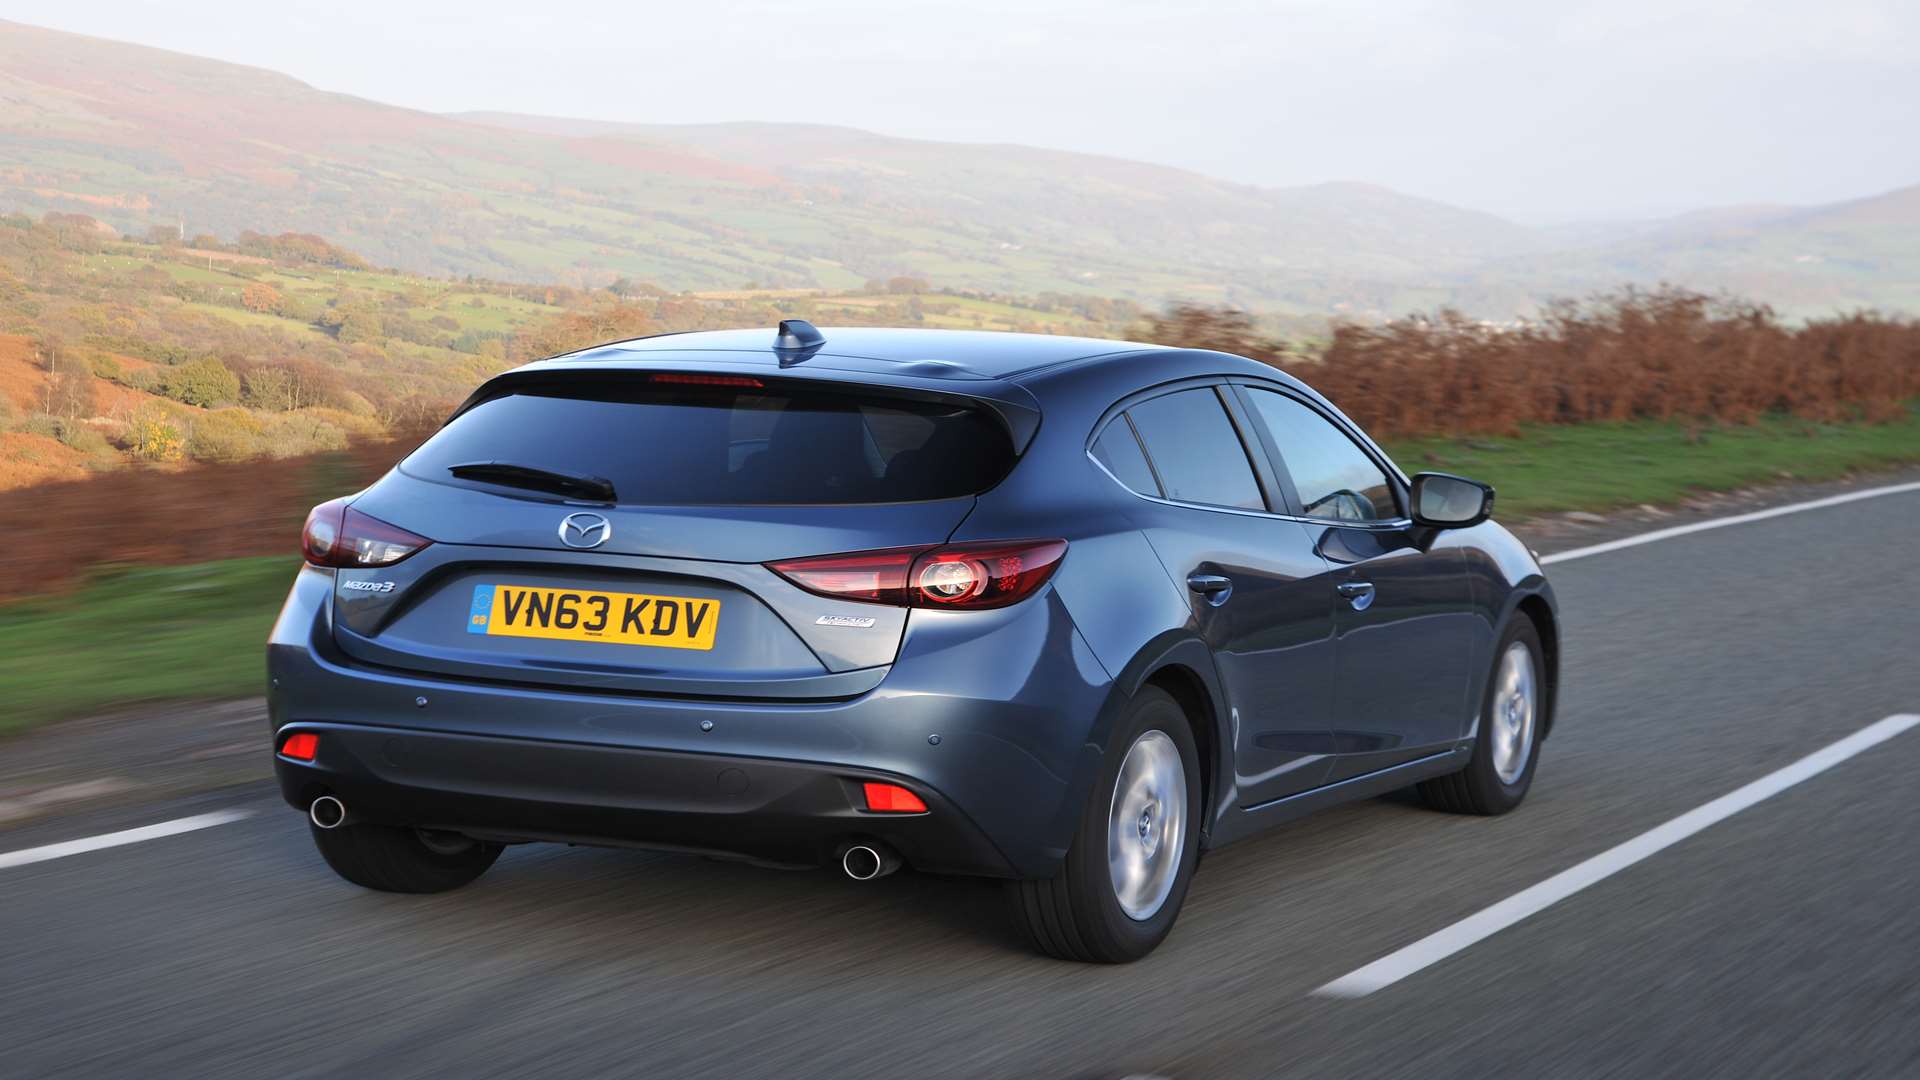 The Mazda3 is one of the best handling cars in its class